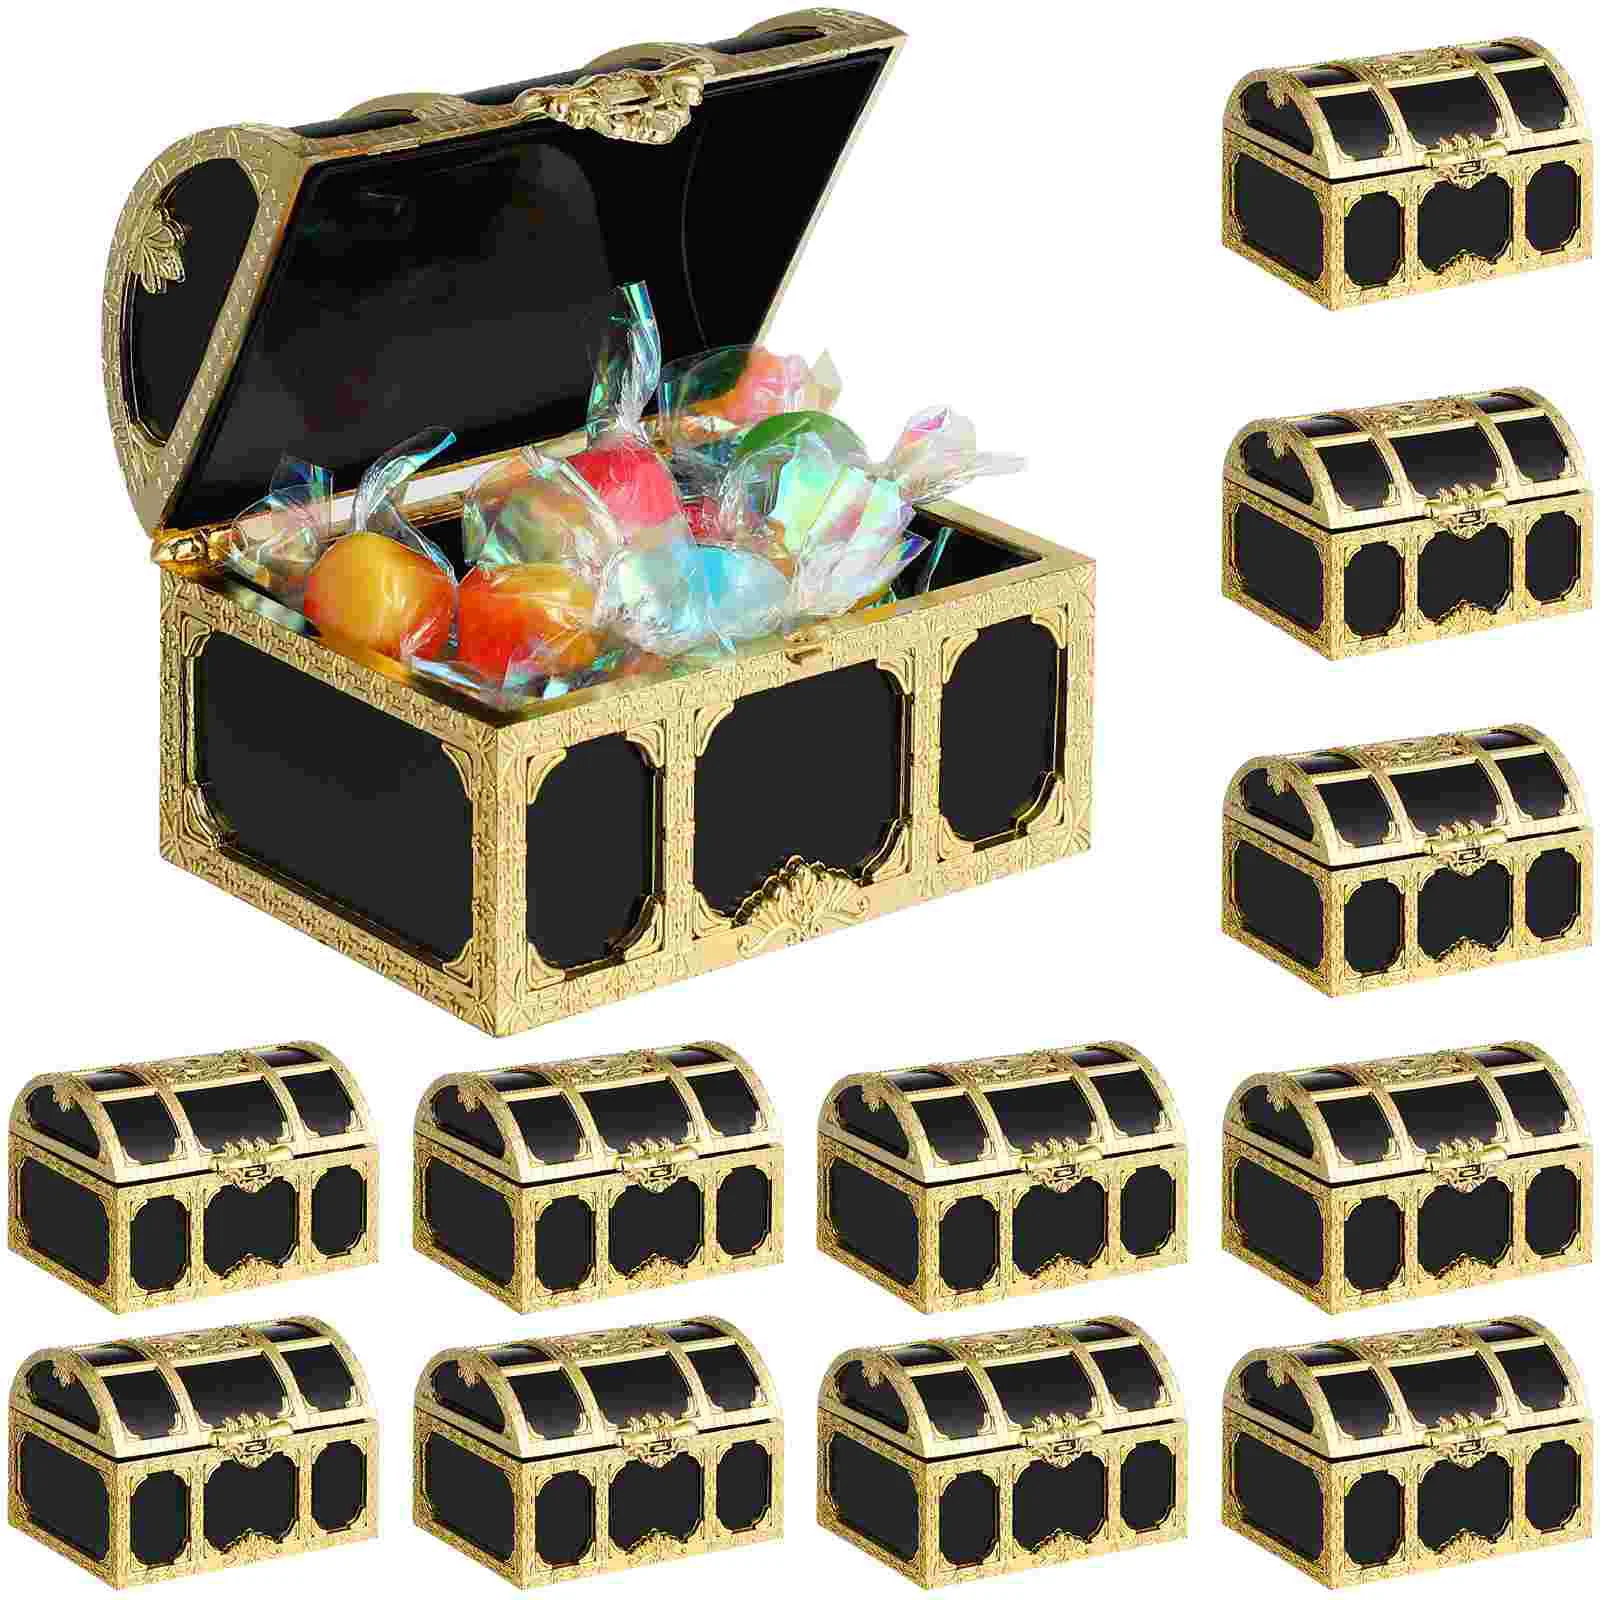 

Treasure Chests Candy Boxes Treat Pirate Boxes Trick or Treat Wedding Birhtday Candy Gift Box Halloween Party Decoration